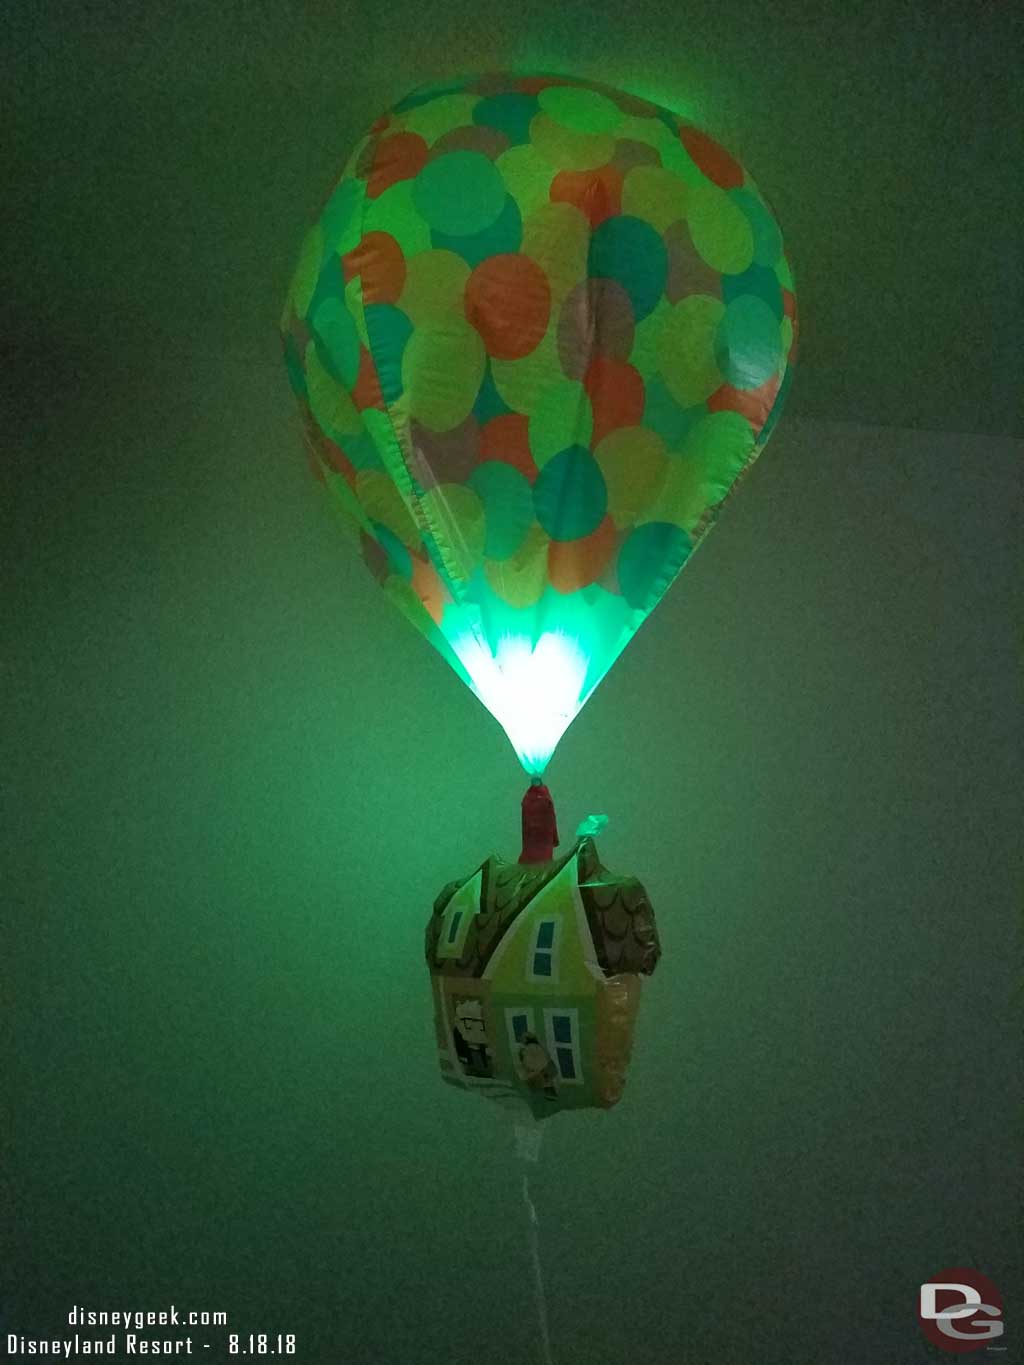 Up! Balloon that was purchased on 7/13 as of 8/18.